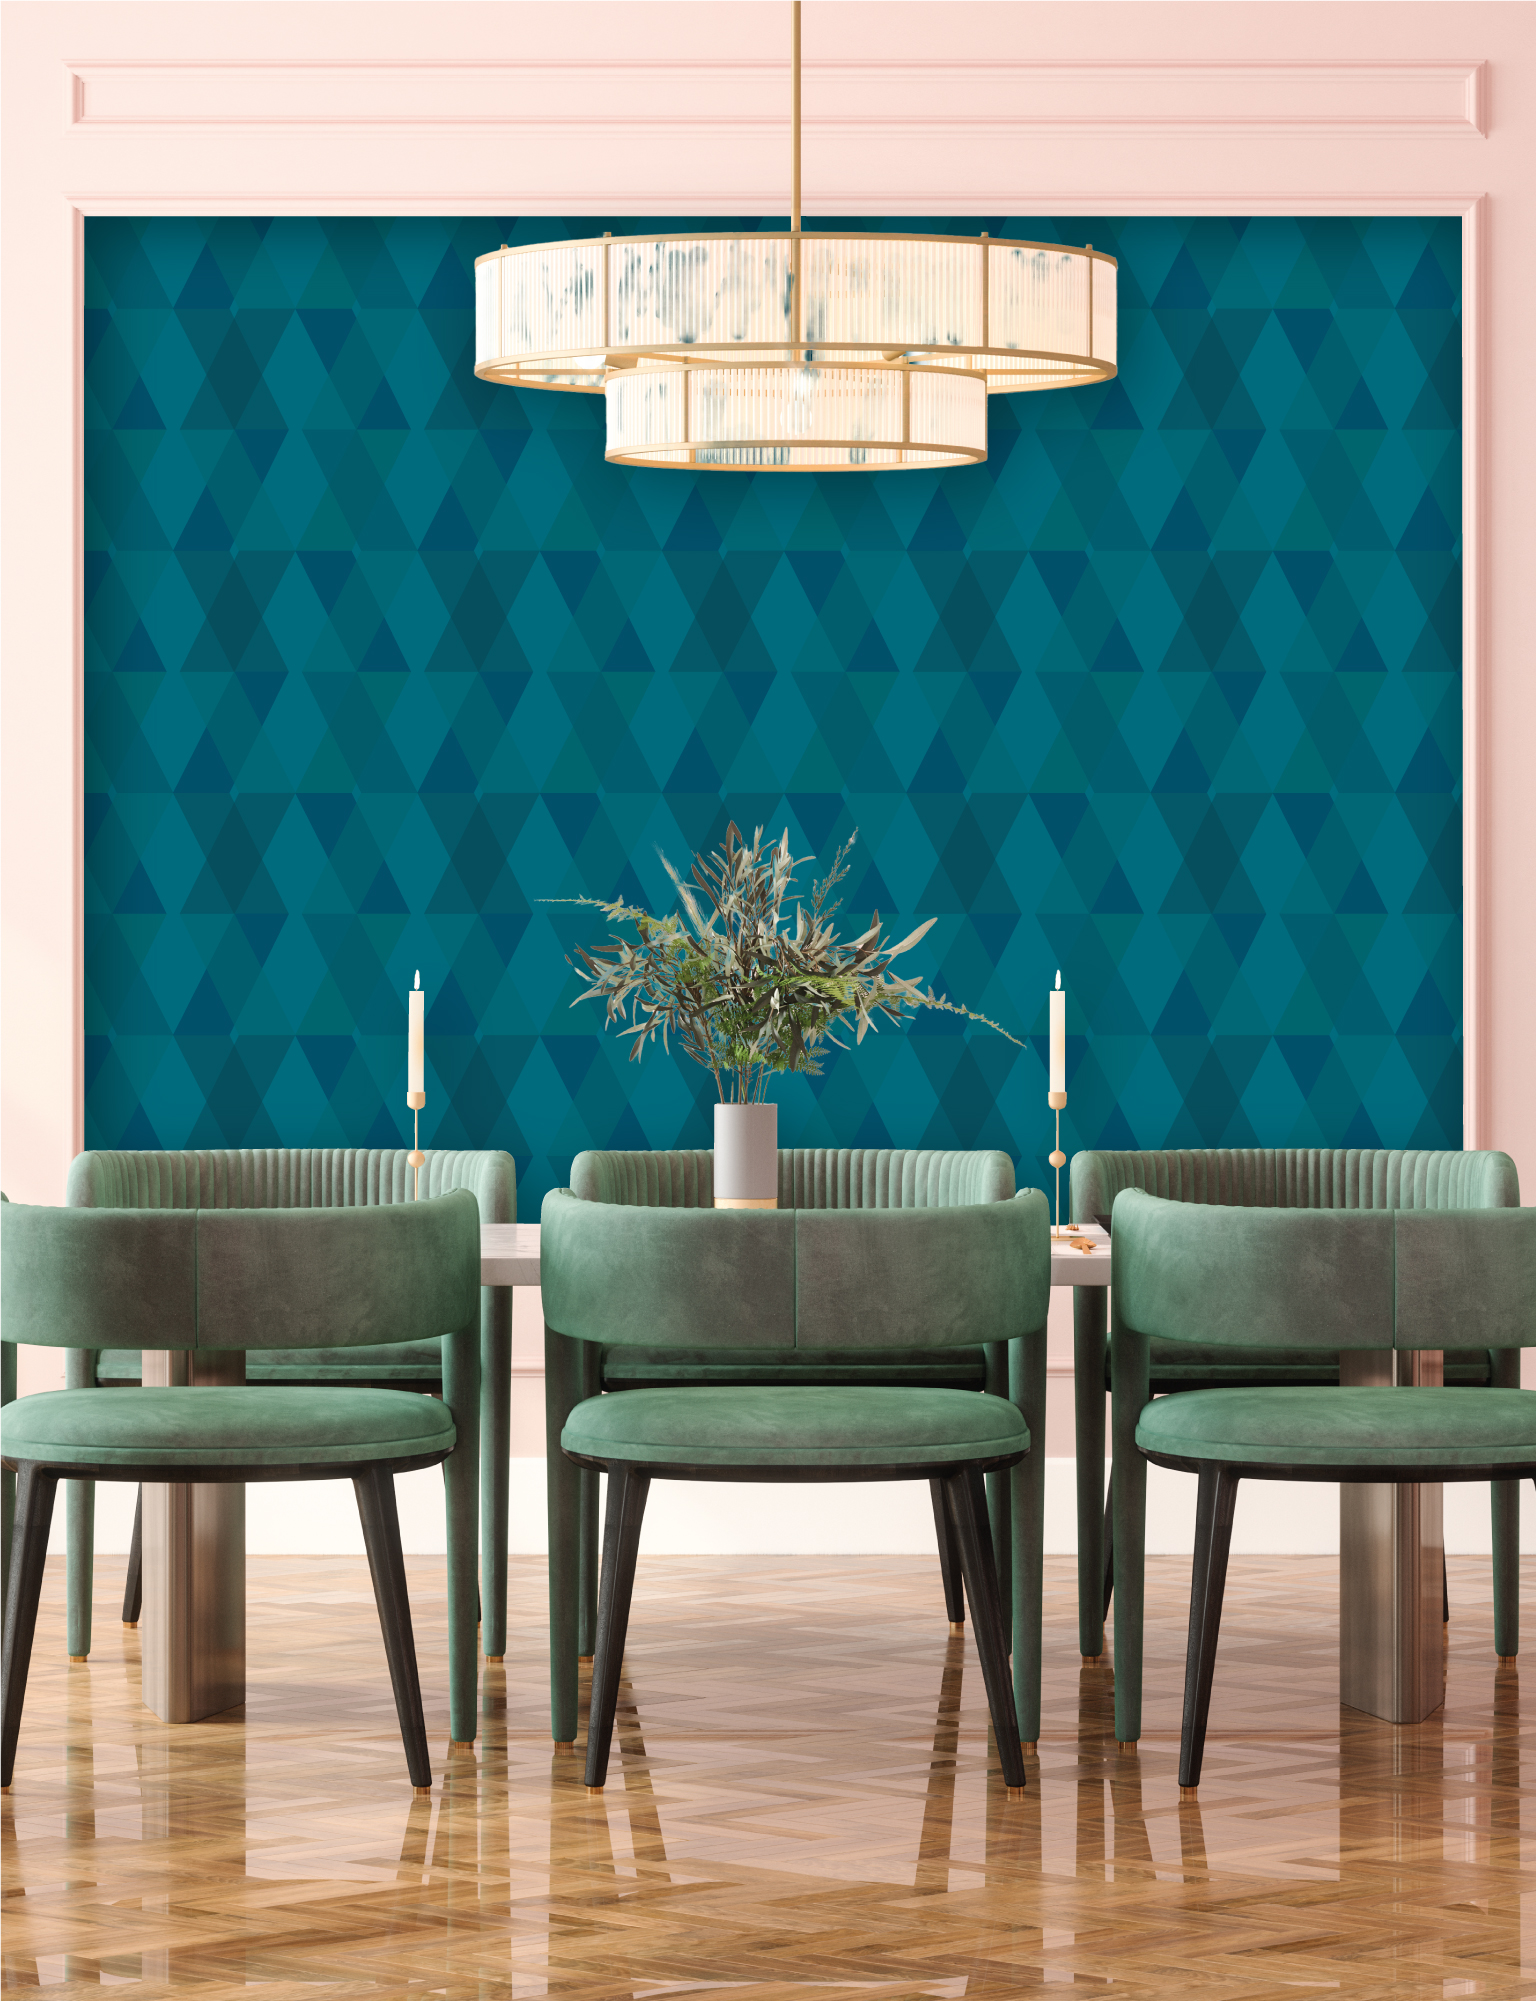 Rolf – Wall covering by PAPERD